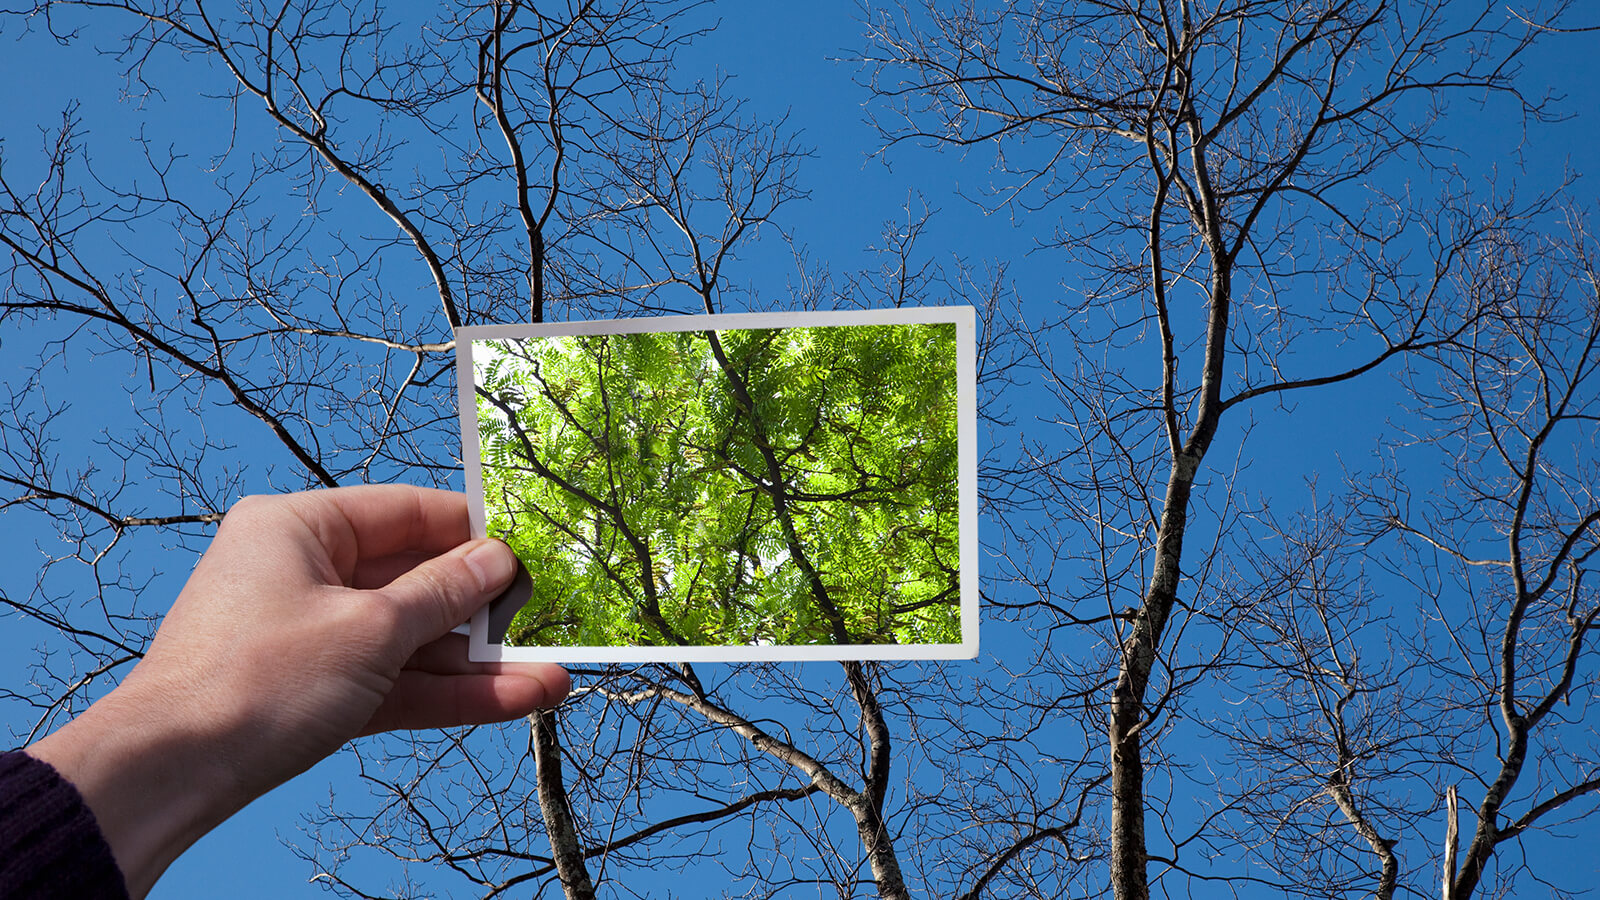 A photo of green leaves is held up against a bare tree